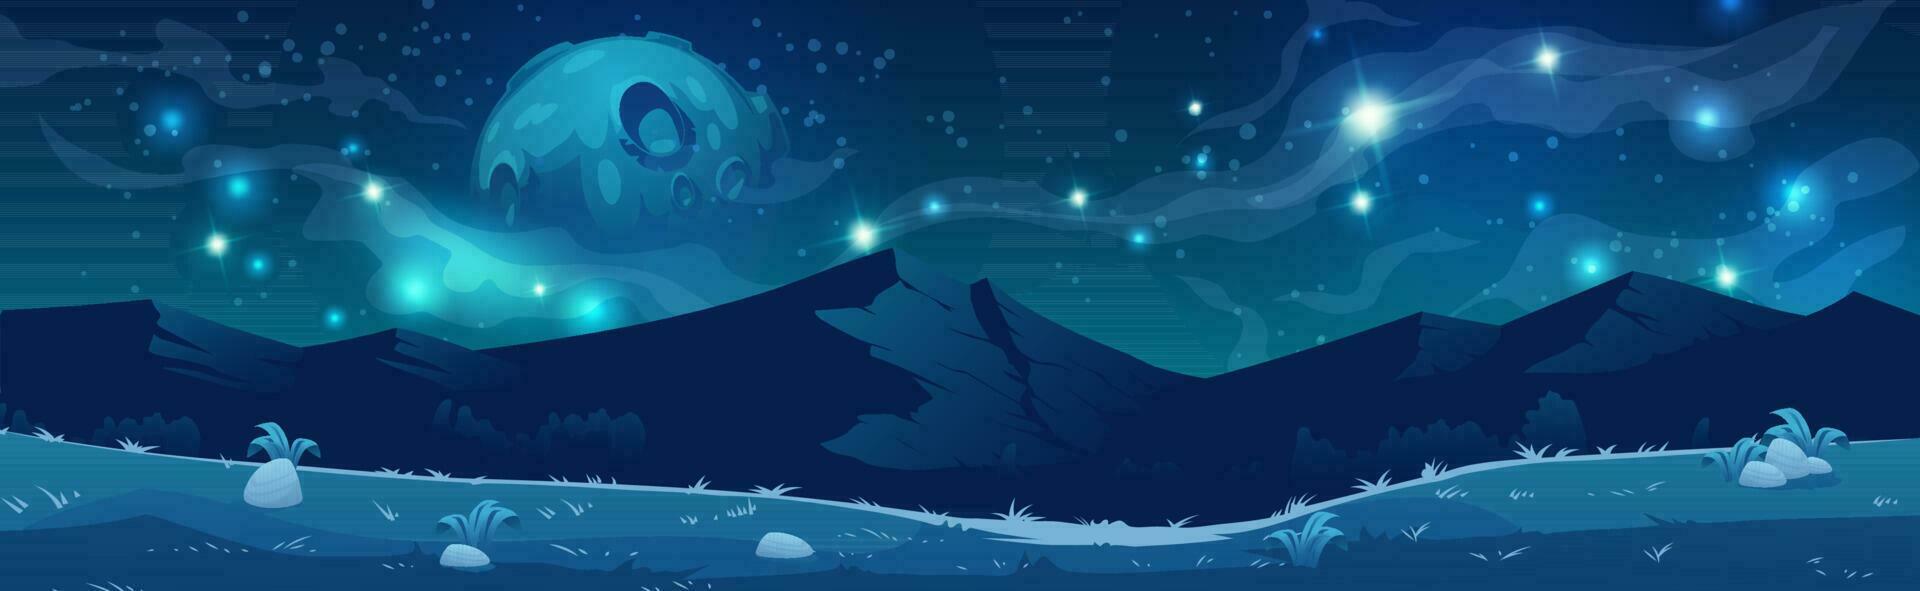 Mountain landscape with moon, stars and milky way vector